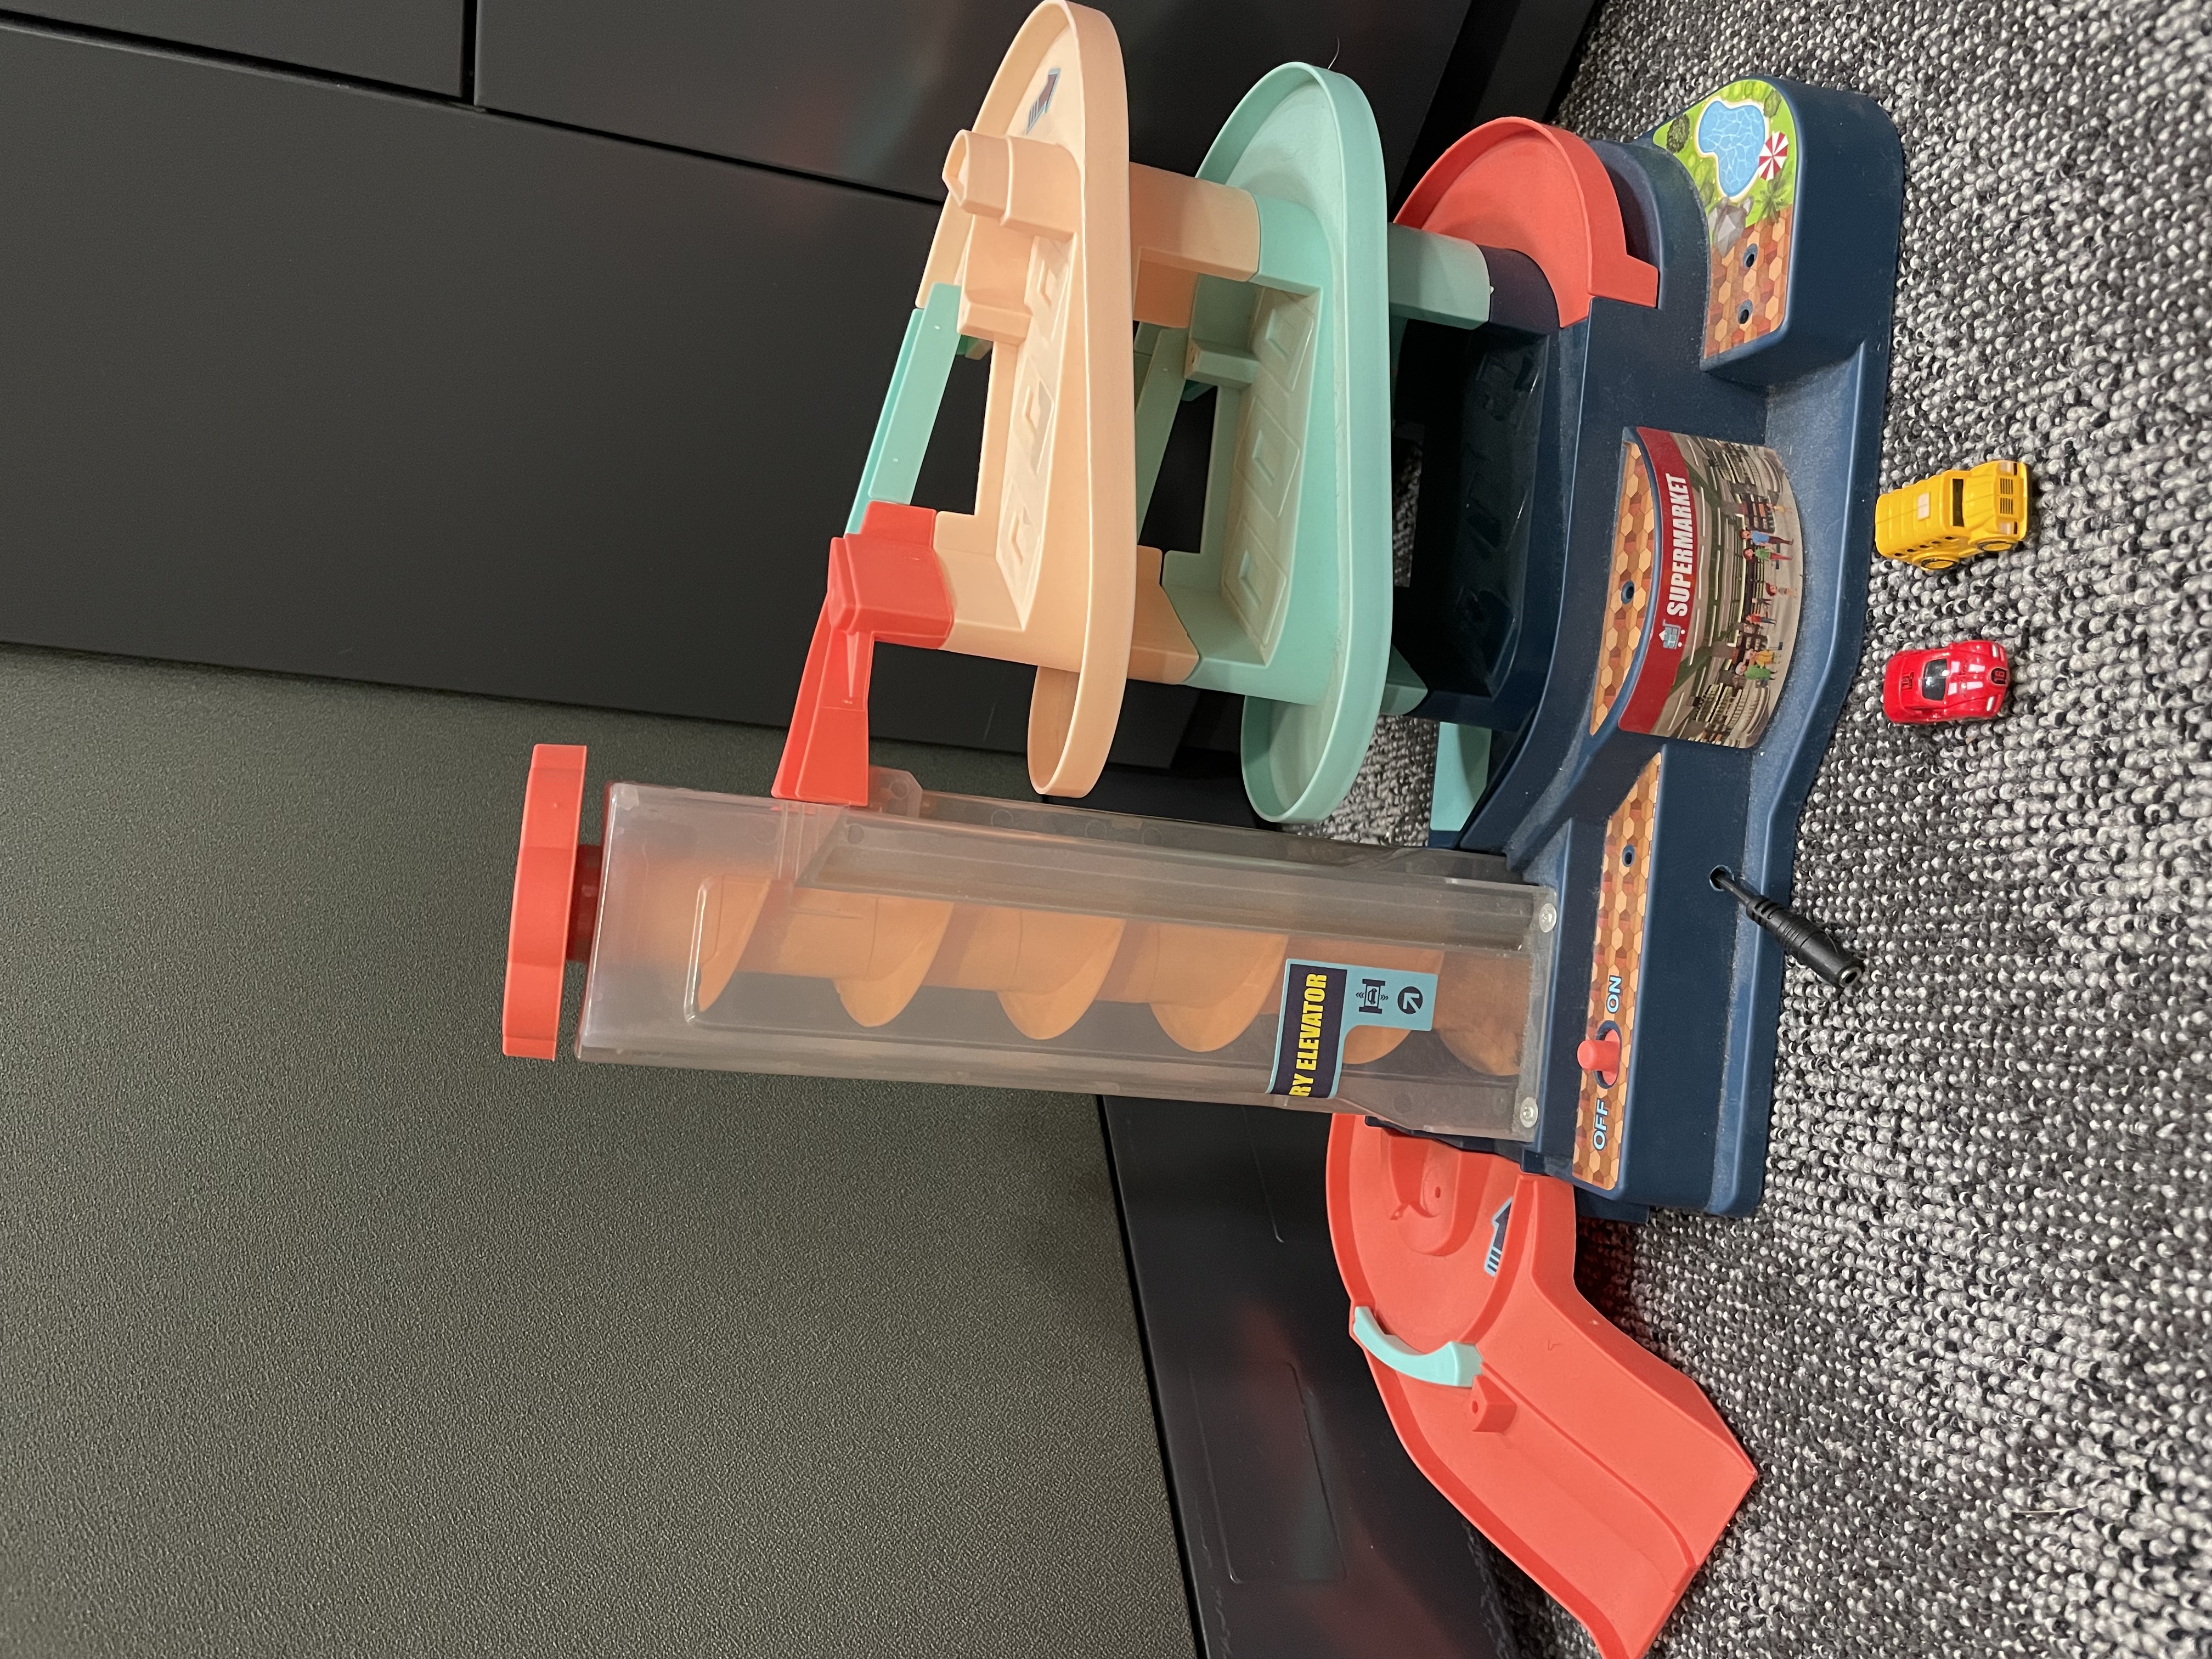 Car garage playset converted to a switch toy